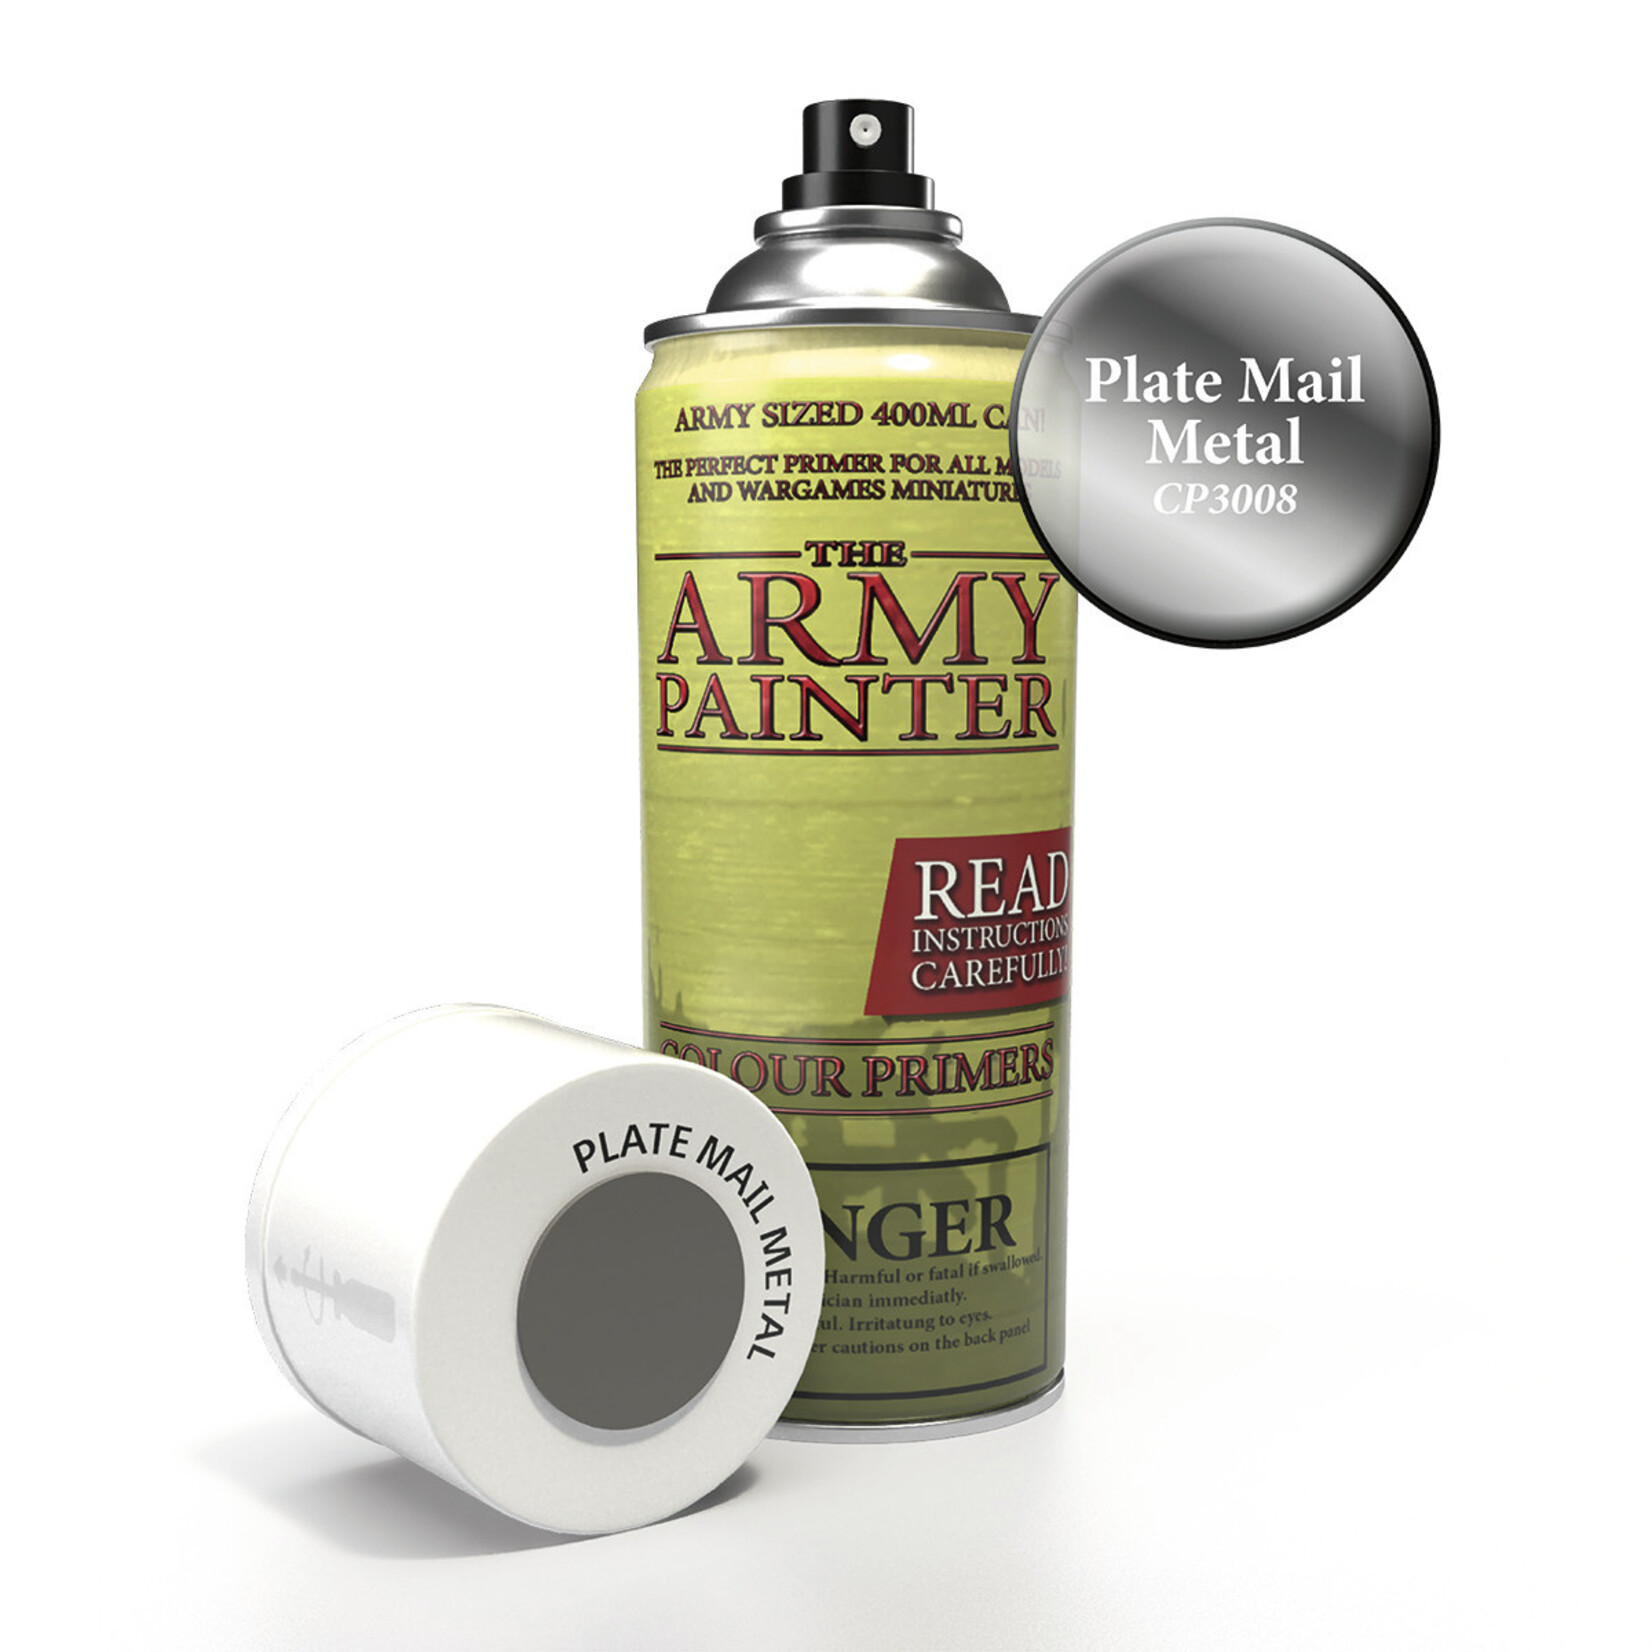 The Army Painter Colour Primer: Plate Mail Metal